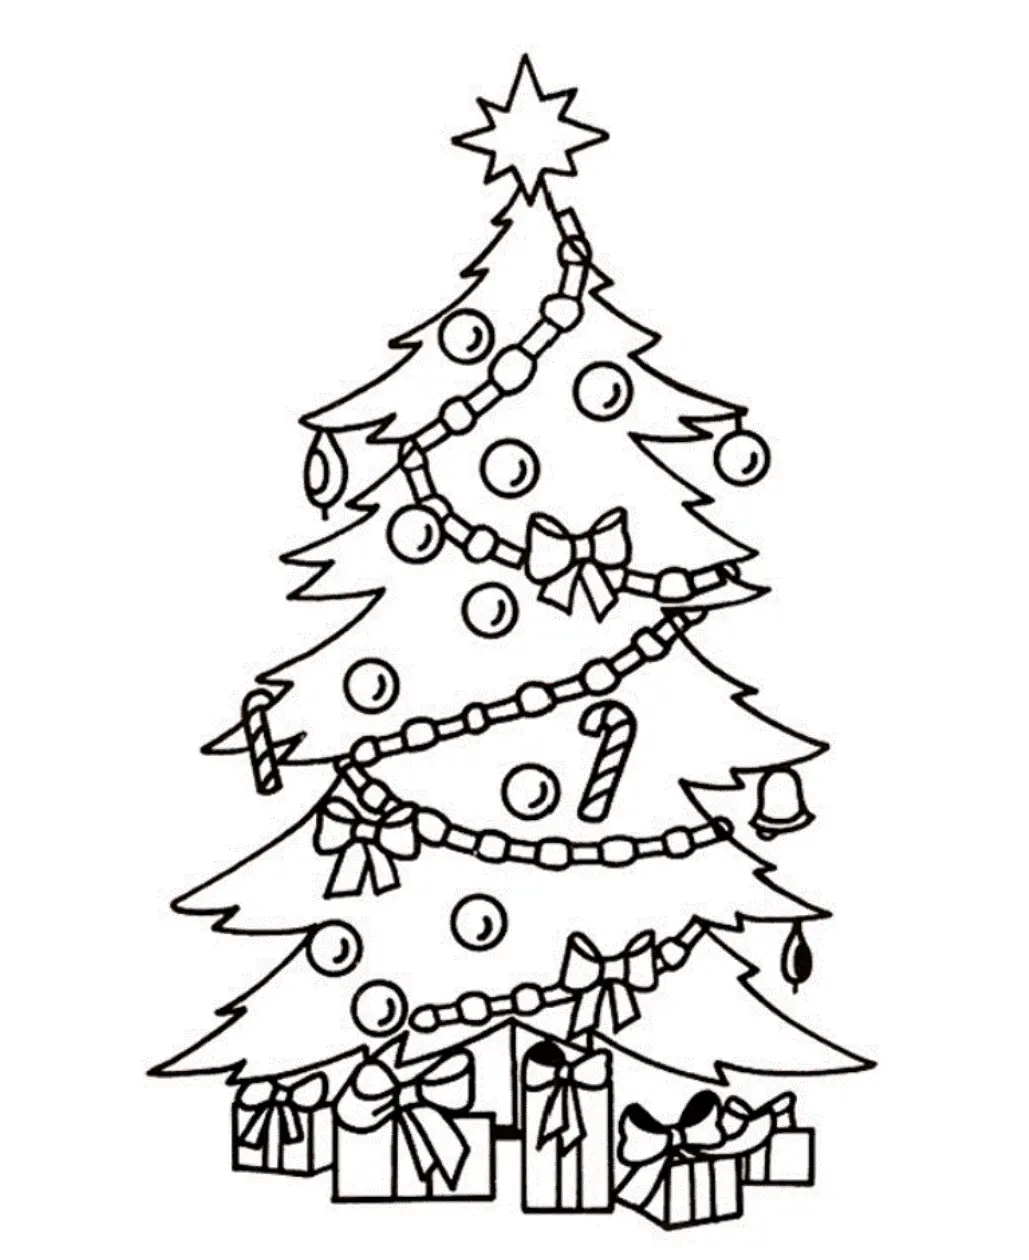 Christmas Tree With Presents Coloring Pages